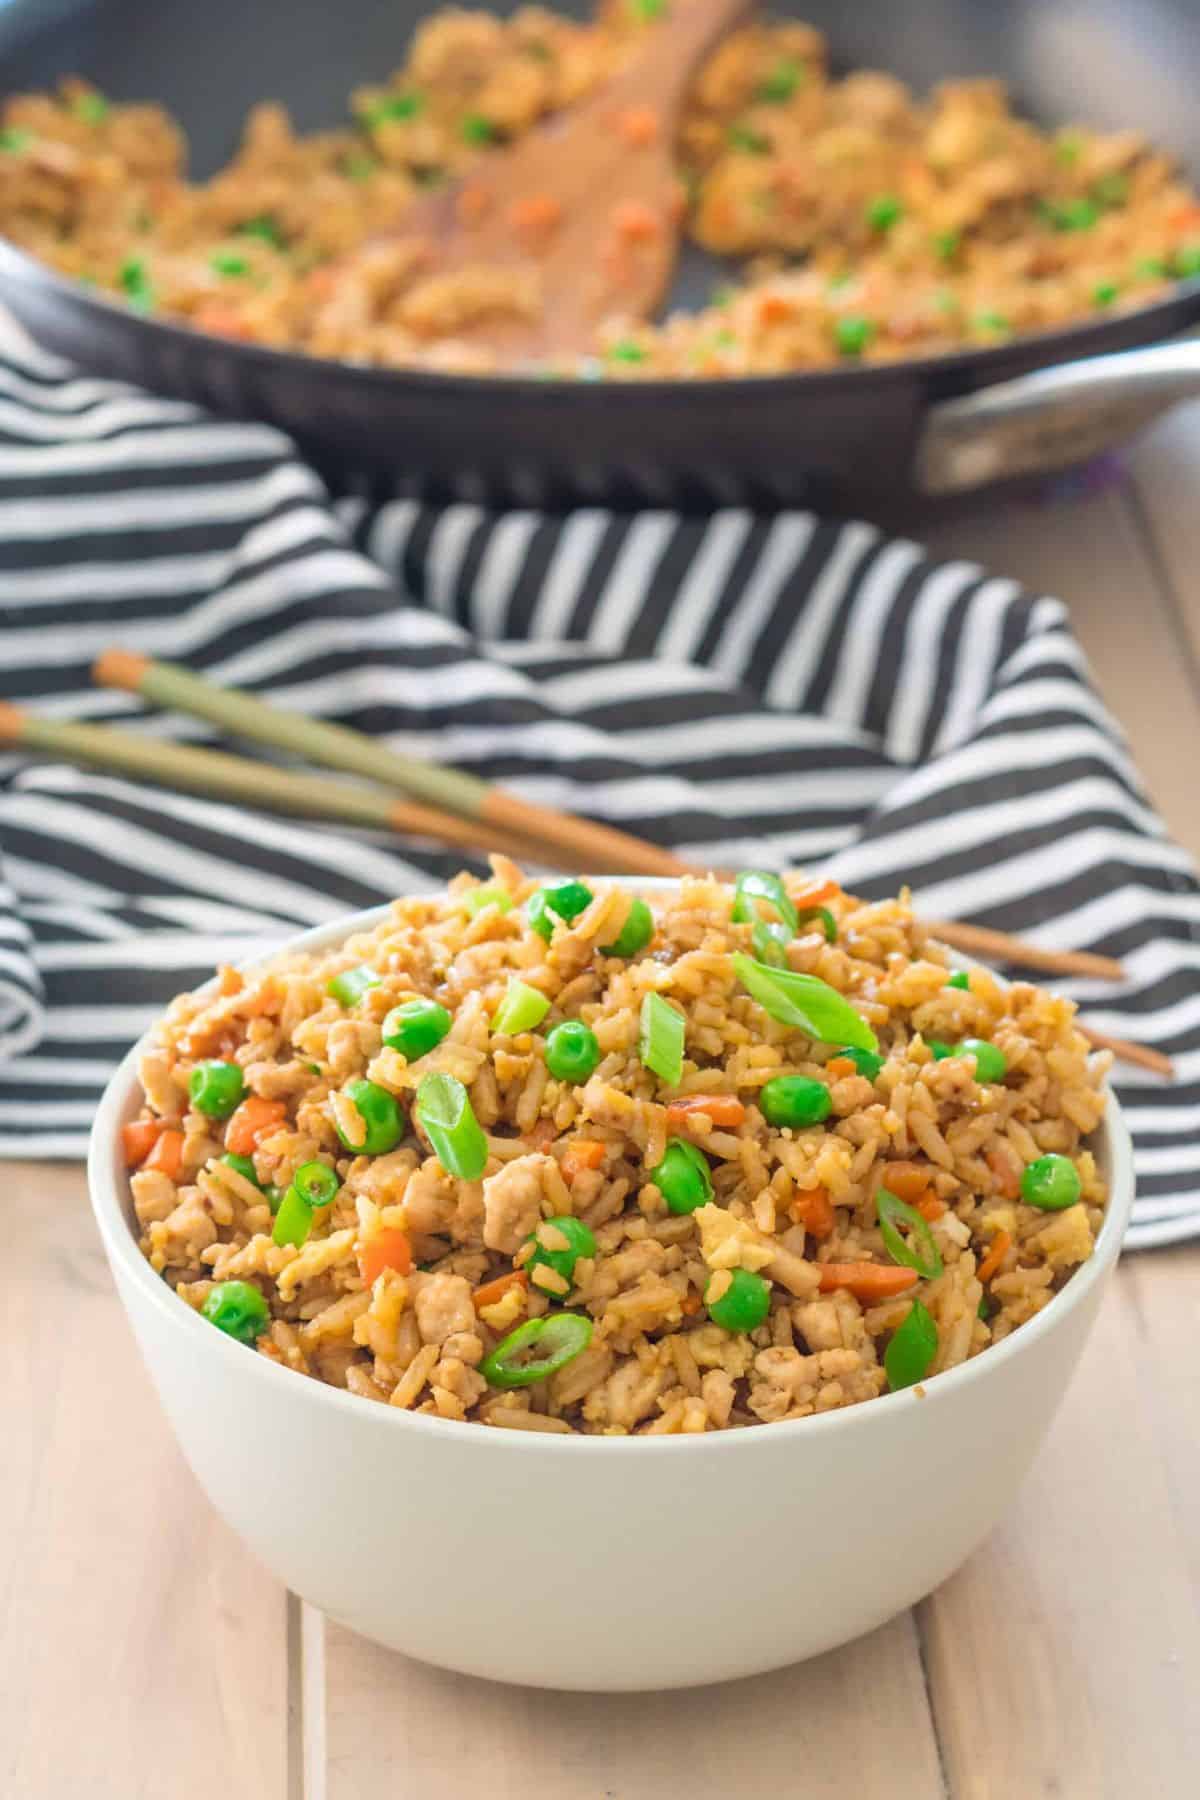 Mouth-watering Gluten-Free Ground Turkey Fried Rice in a white bowl.